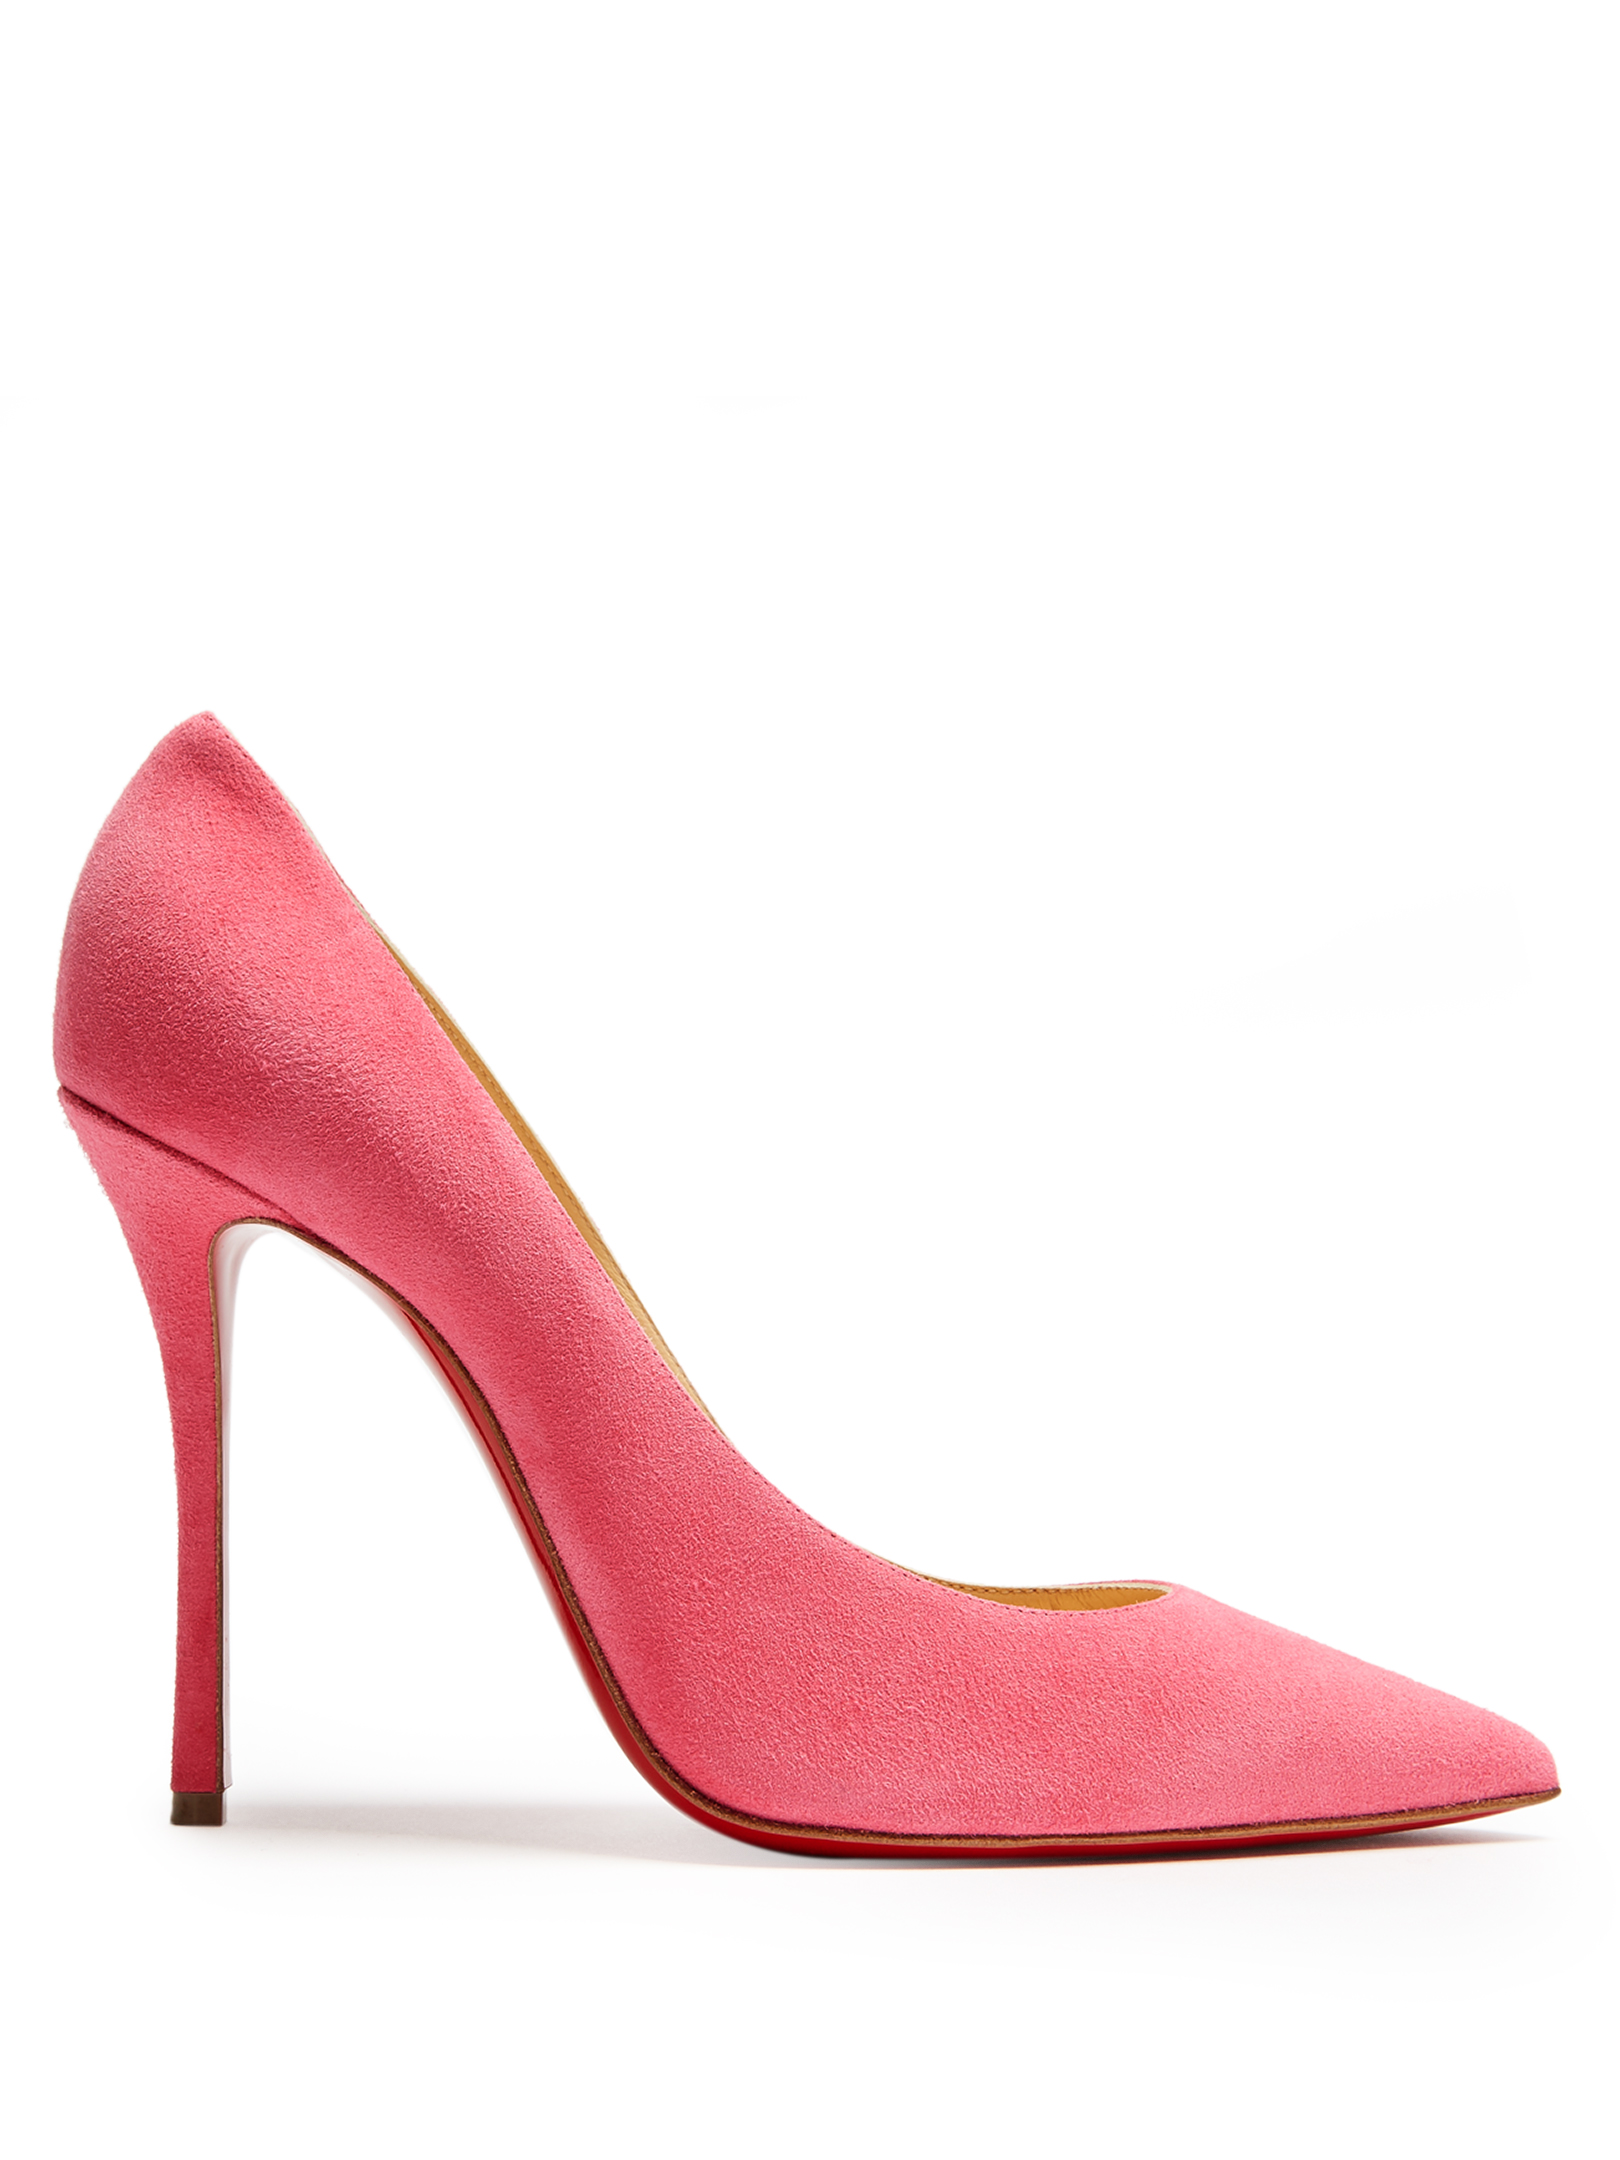 Christian Louboutin - Decoltish 100Mm Suede Pumps | ABOUT ICONS